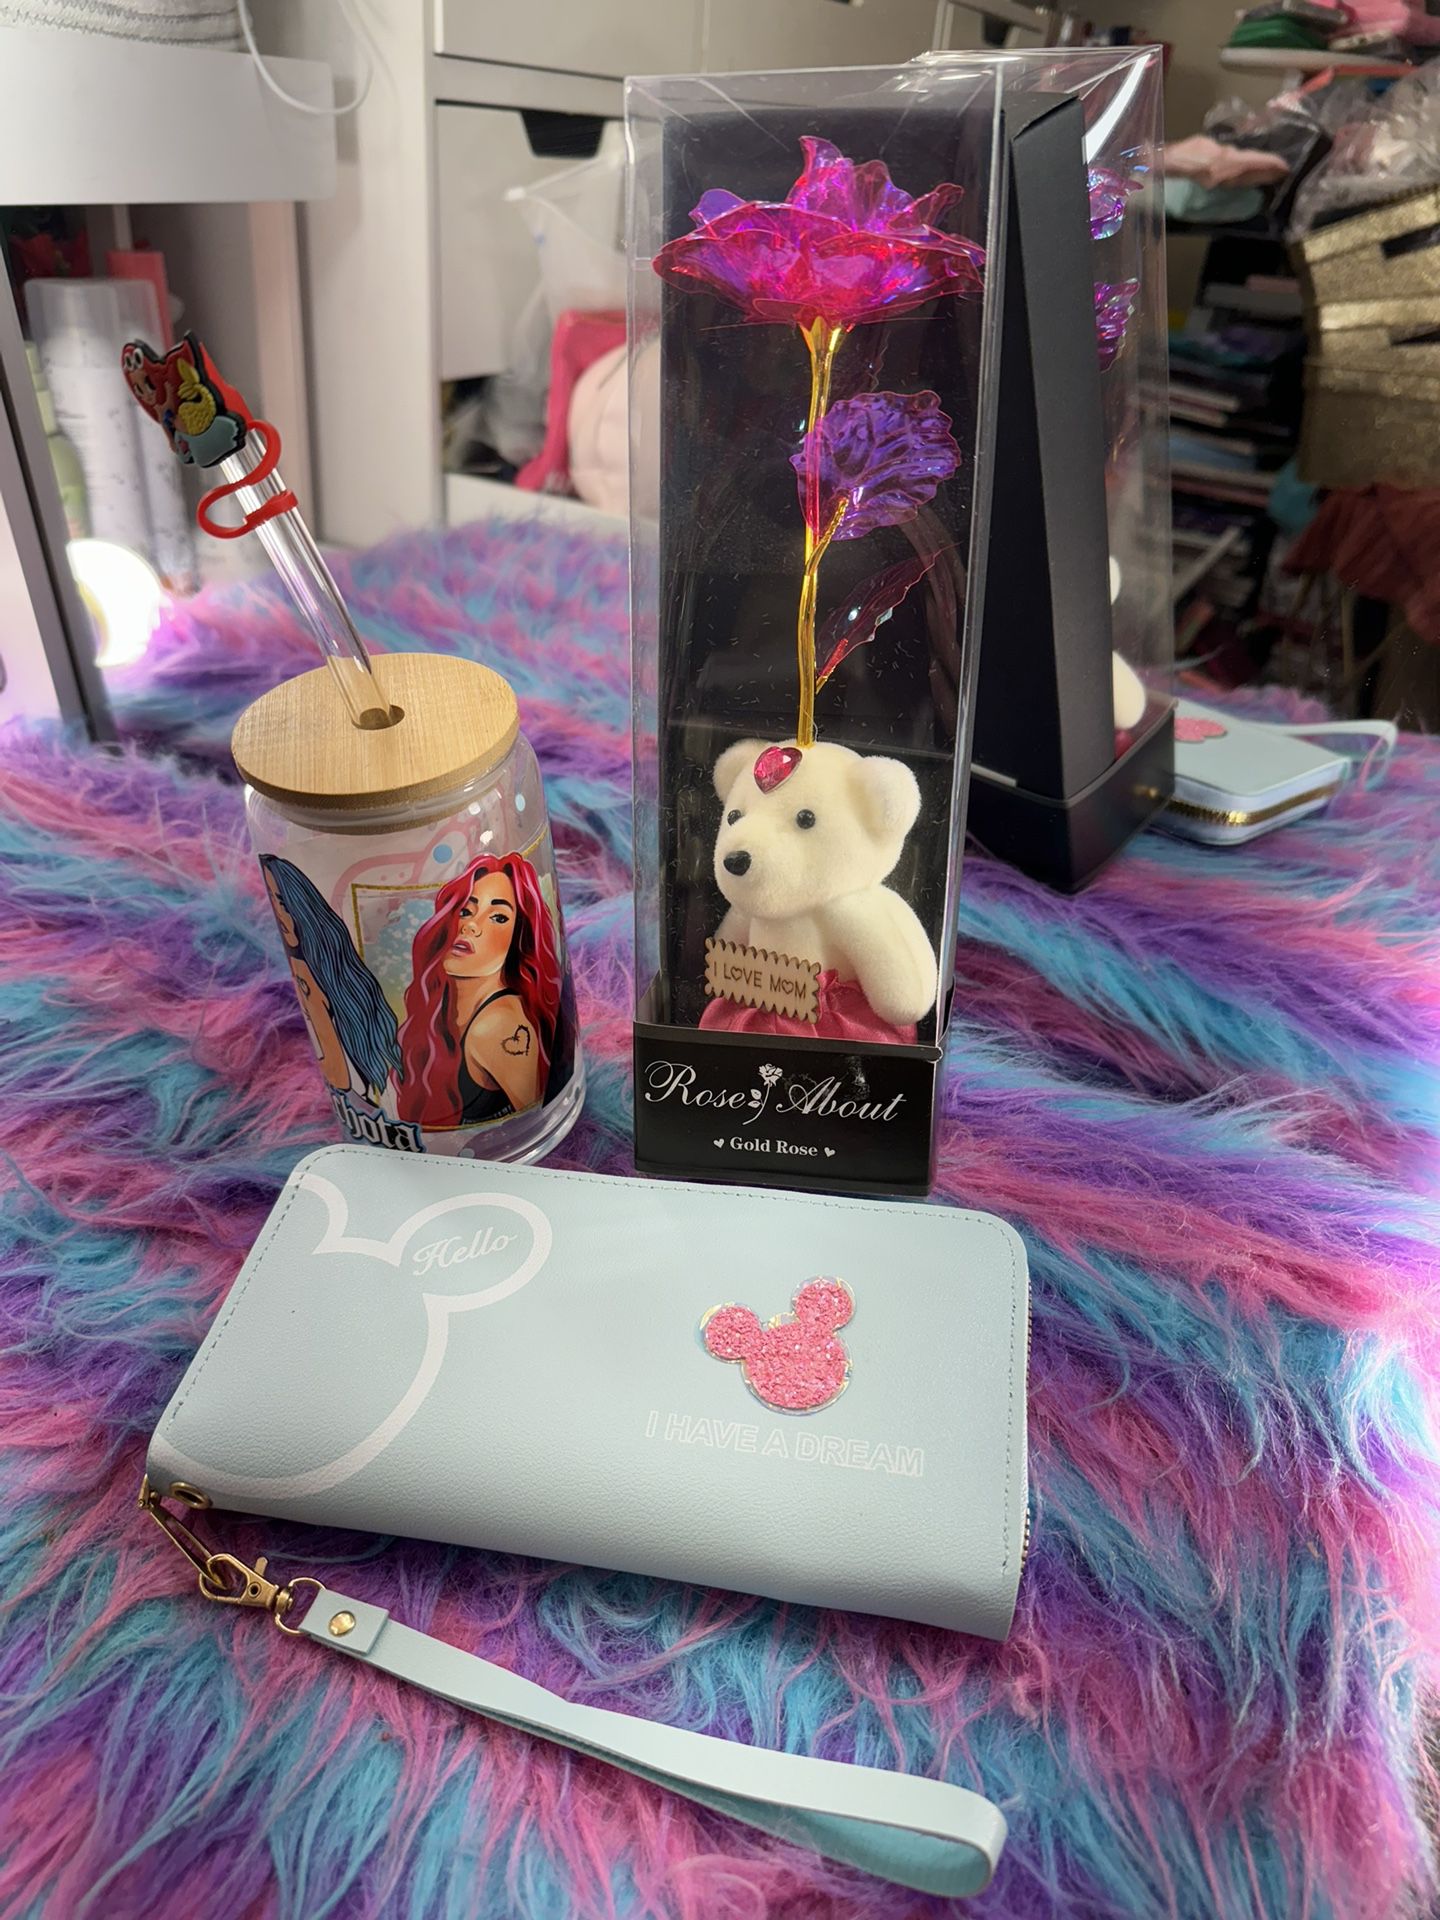 Perfect Bundle Mothers Day Gift 💝 Karol g Glass Cup & Disney Wallet  & Light Rose 🌹 With A Bear 🐻 